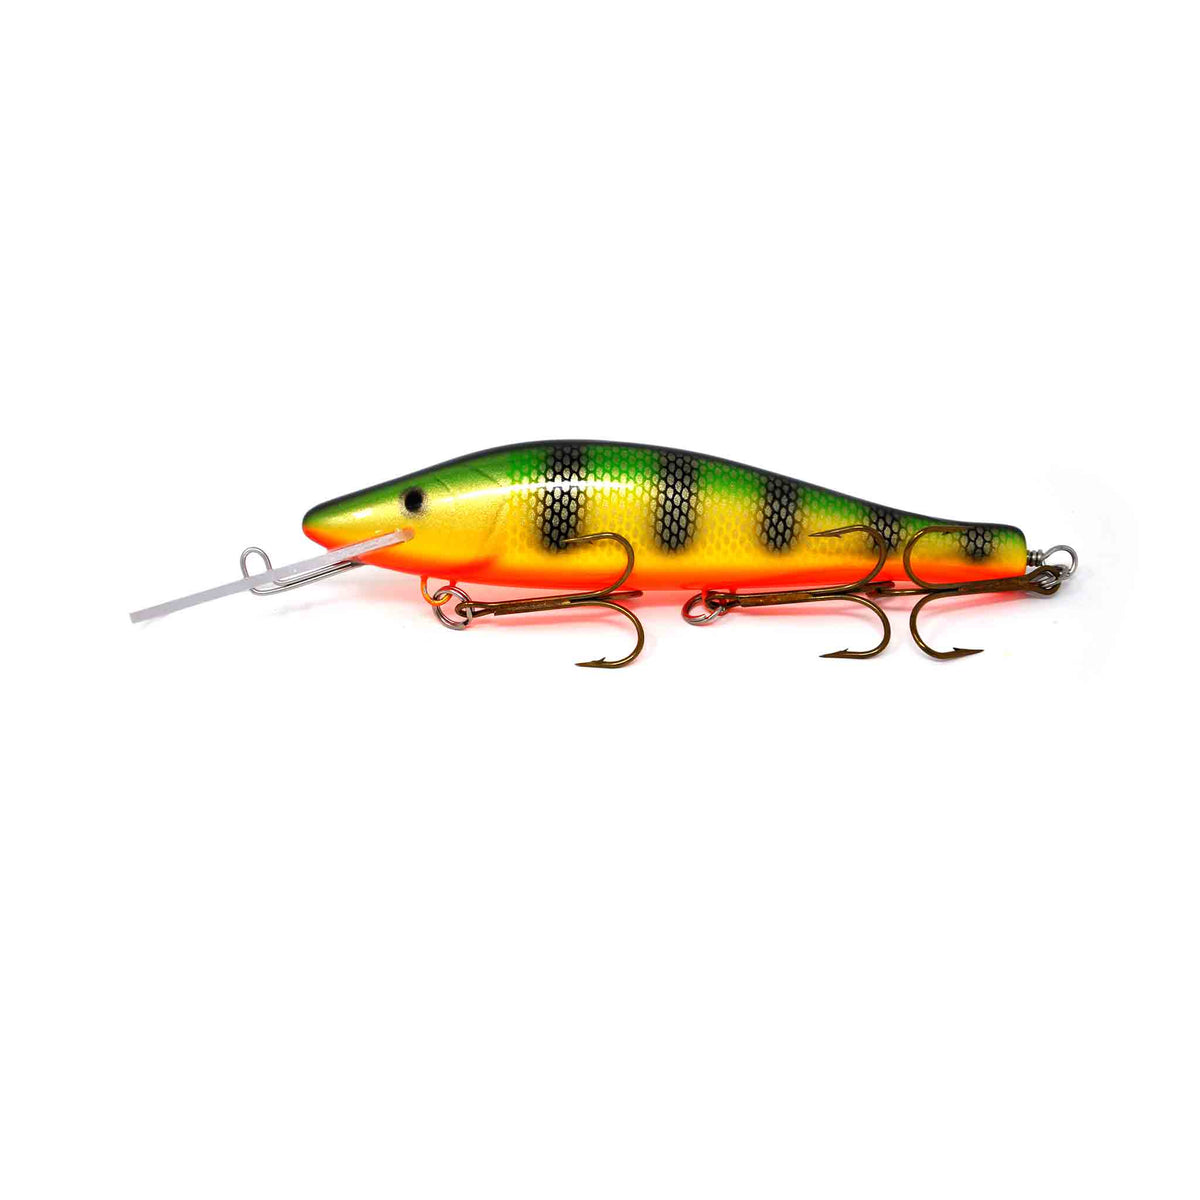 Cheap Kingdom Crazy Trout Fishing Soft Lure Silicone 12cm Lead Head PVC  pike Fishing lures Swimming Soft Baits T-Tail Swimbait Wobbler